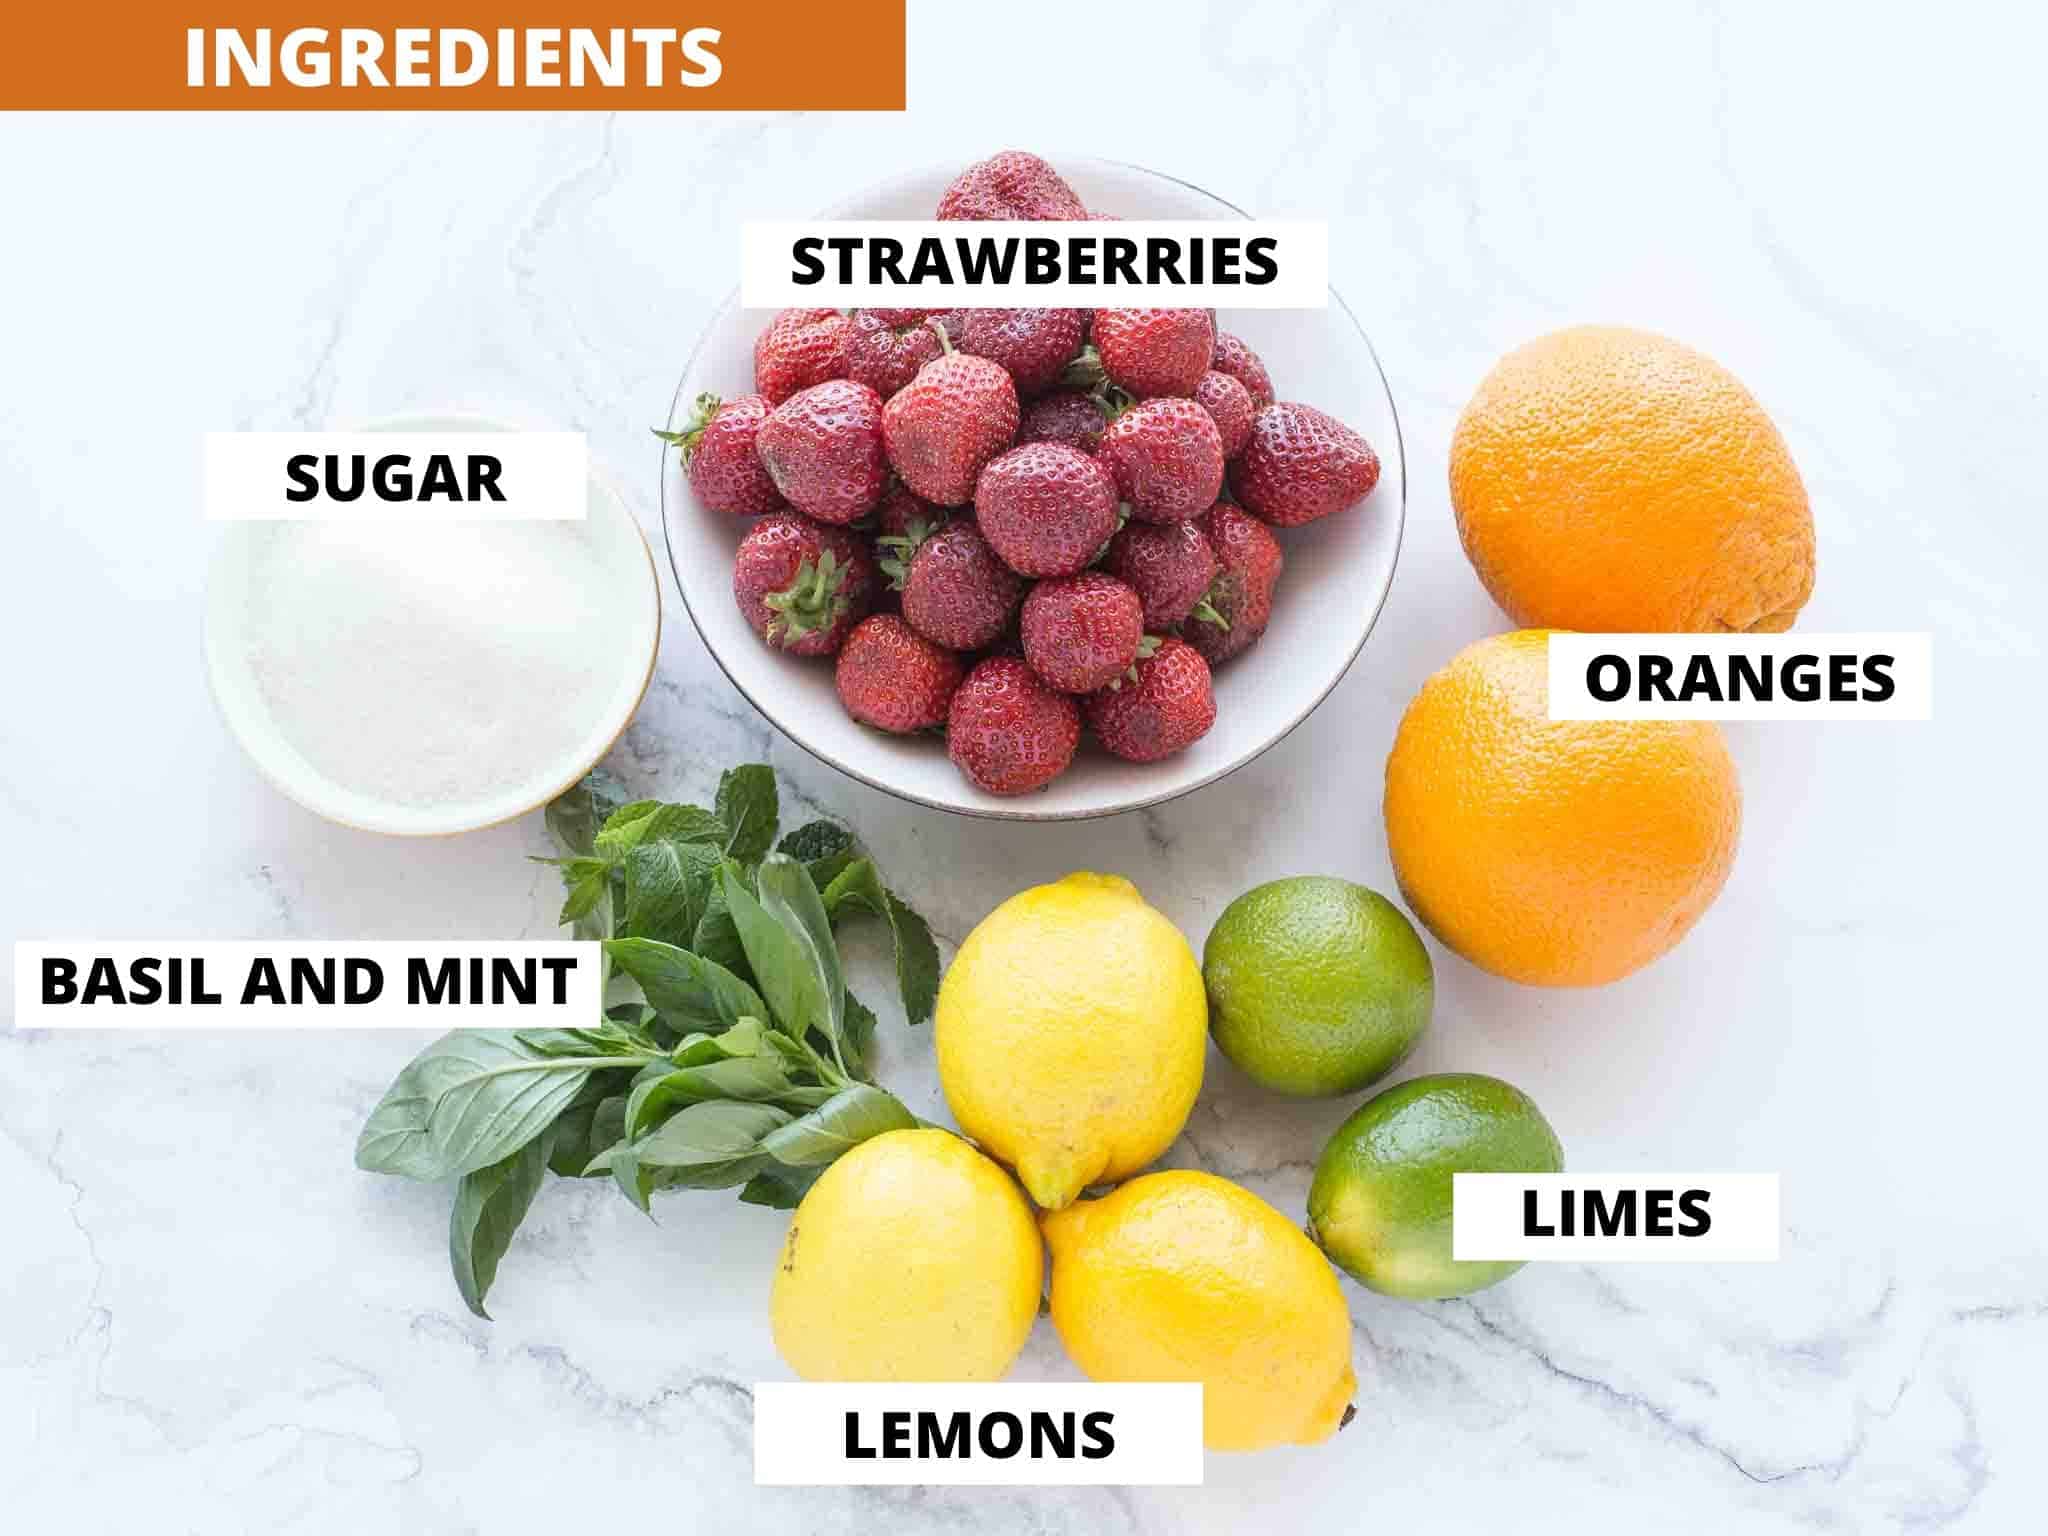 ingredients for strawberry lemonade on marbled background.